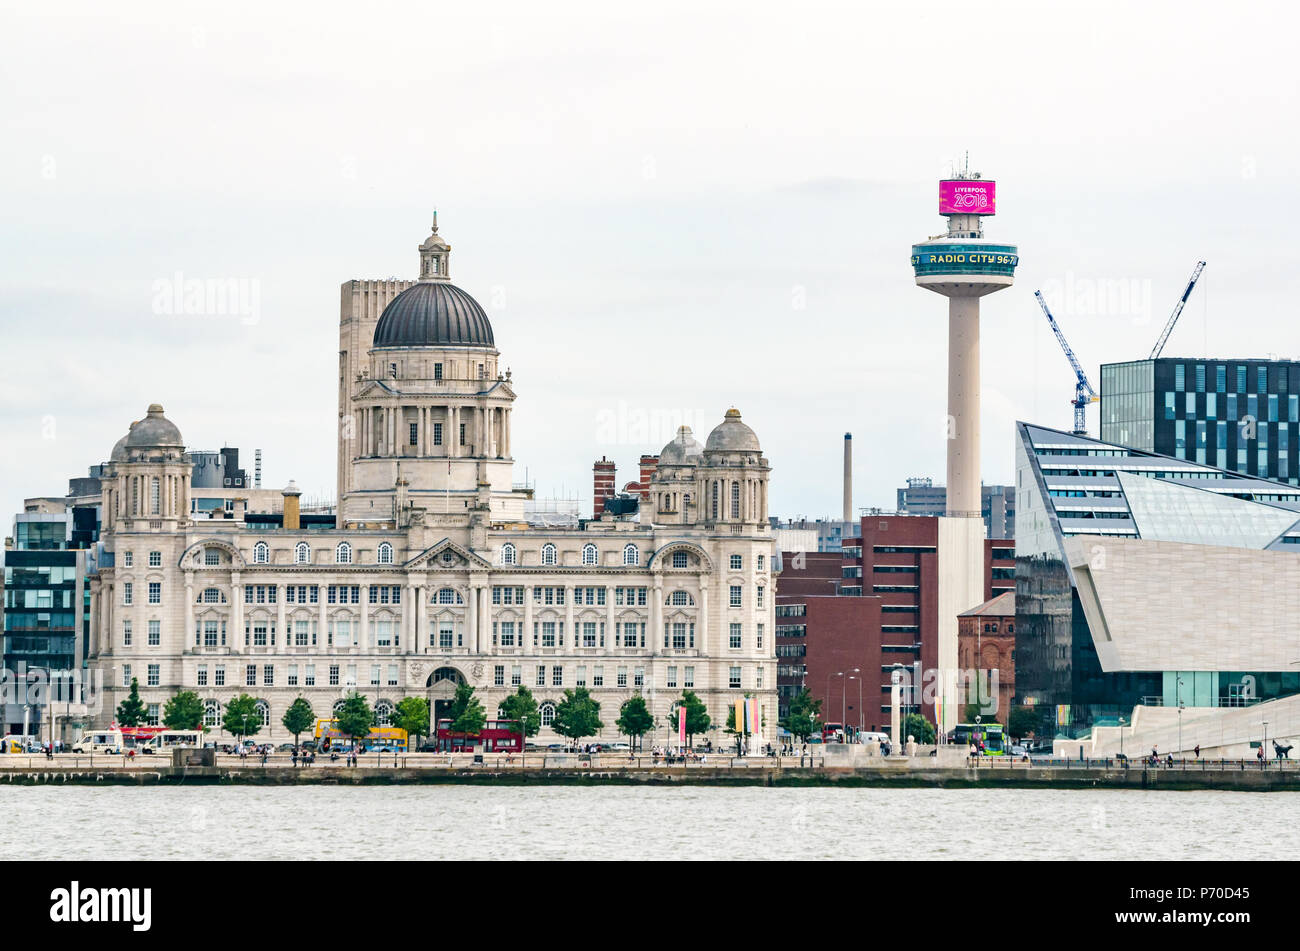 St John's Beacon Radio City observation tower and grand domed Port of Liverpool building, Pier Head riverside, Liverpool, England, UK Stock Photo